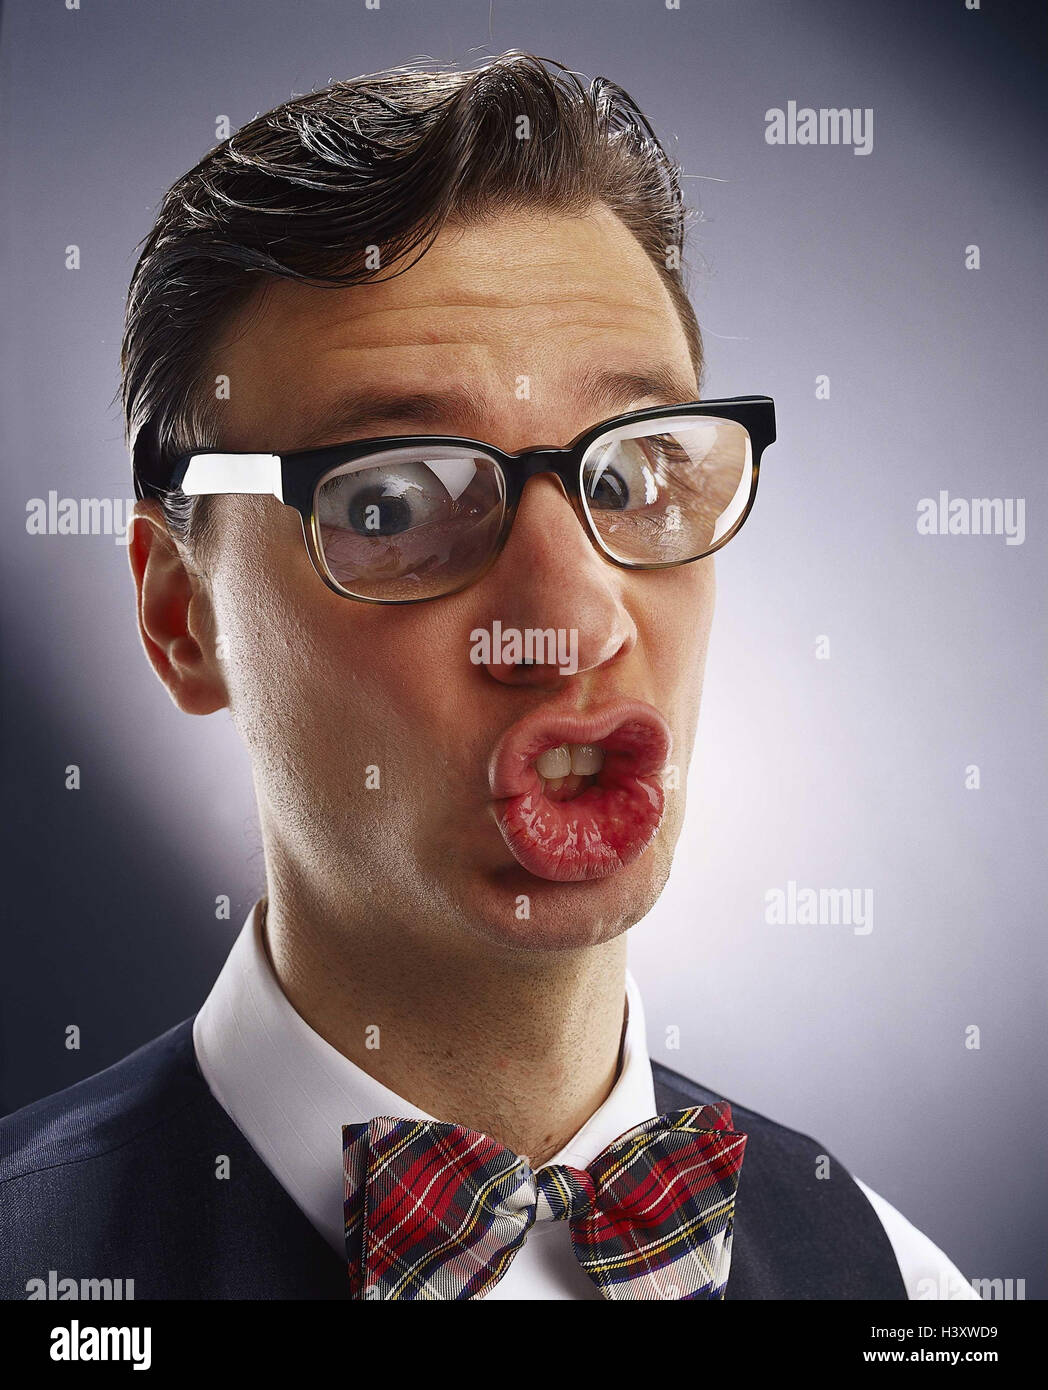 Man, young, glasses, lenses, strongly, facial play, grimace, portrait, Men, shirt, fly, petty bourgeois, lips, 'Schnute', stupidly, funnily, strangely, fun, joke, studio, Stock Photo